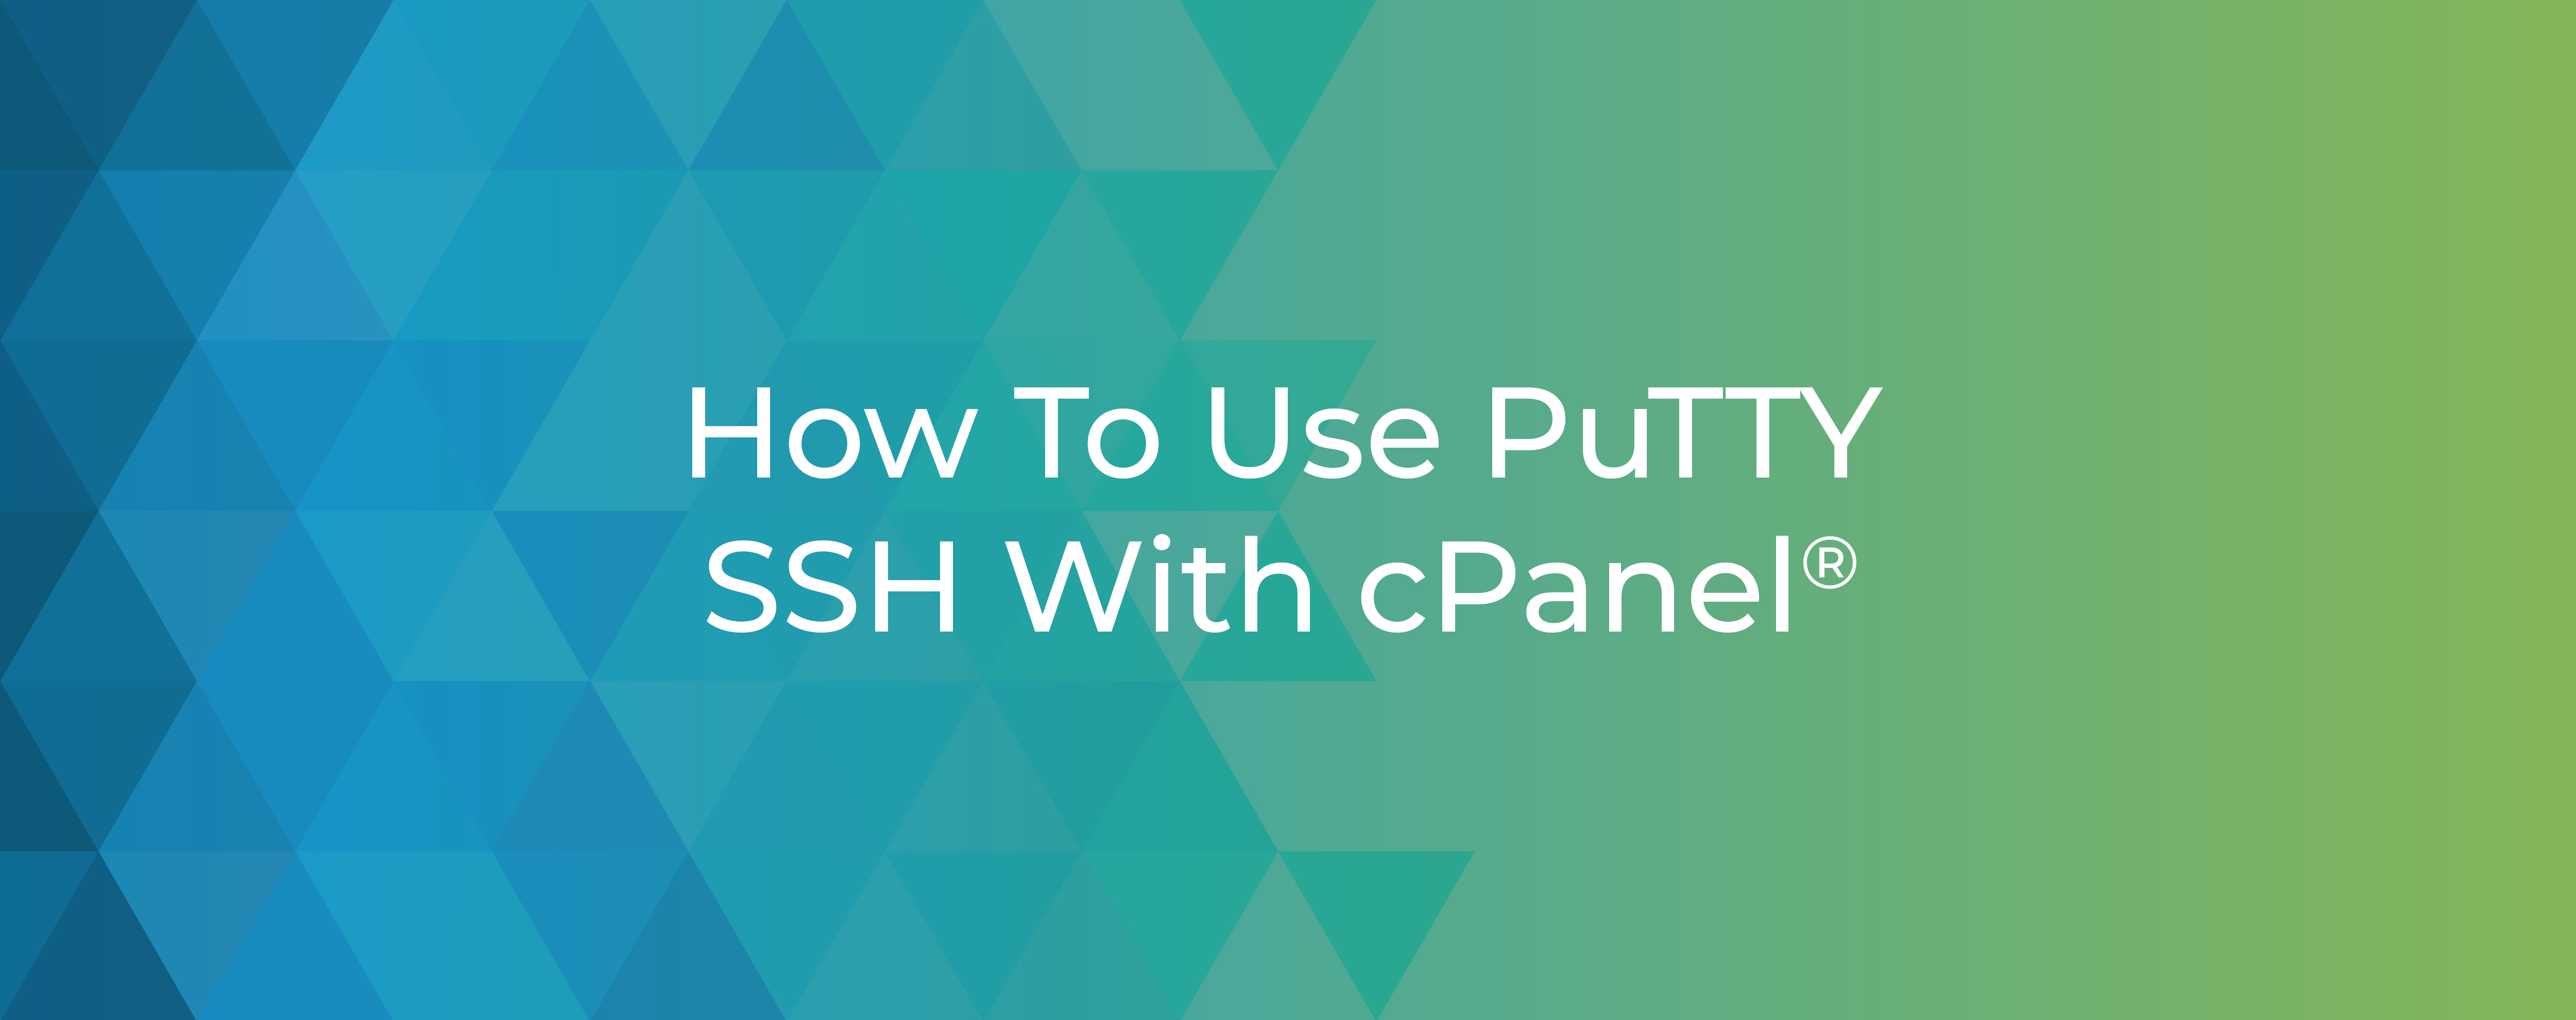 How To Use PuTTY SSH With cPanel®